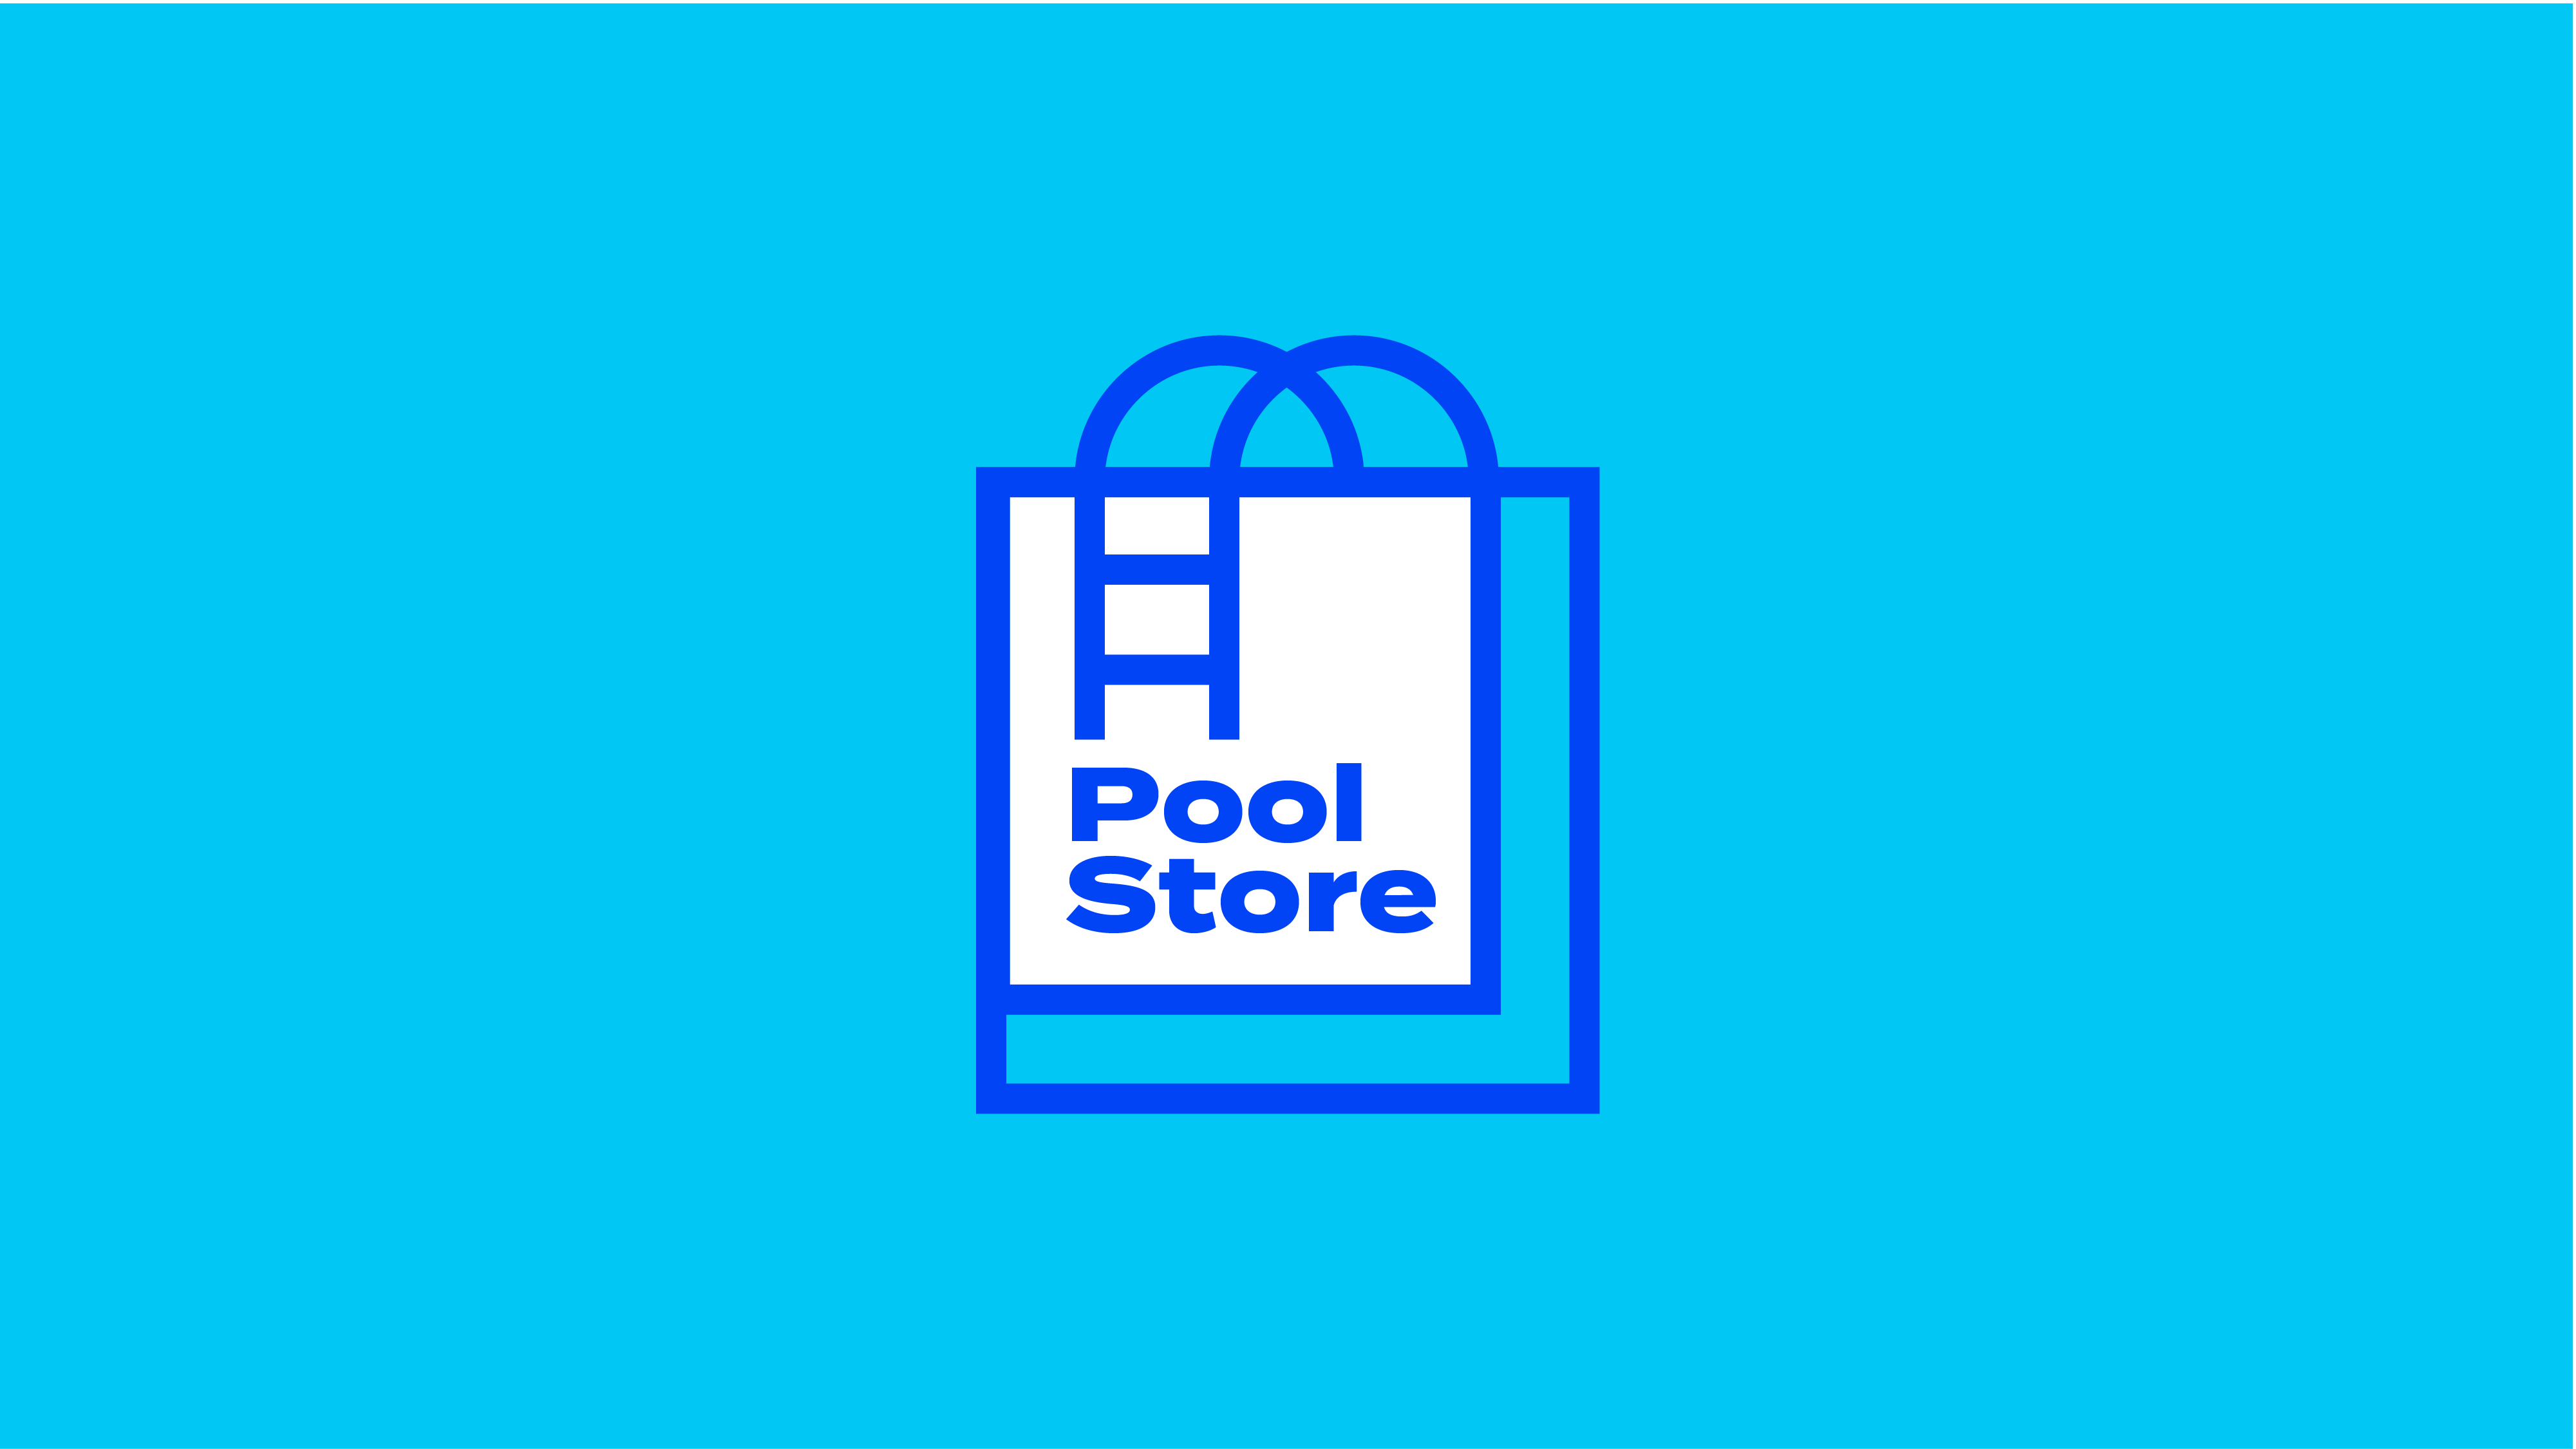 Pool Store swimming pools and Landscapes